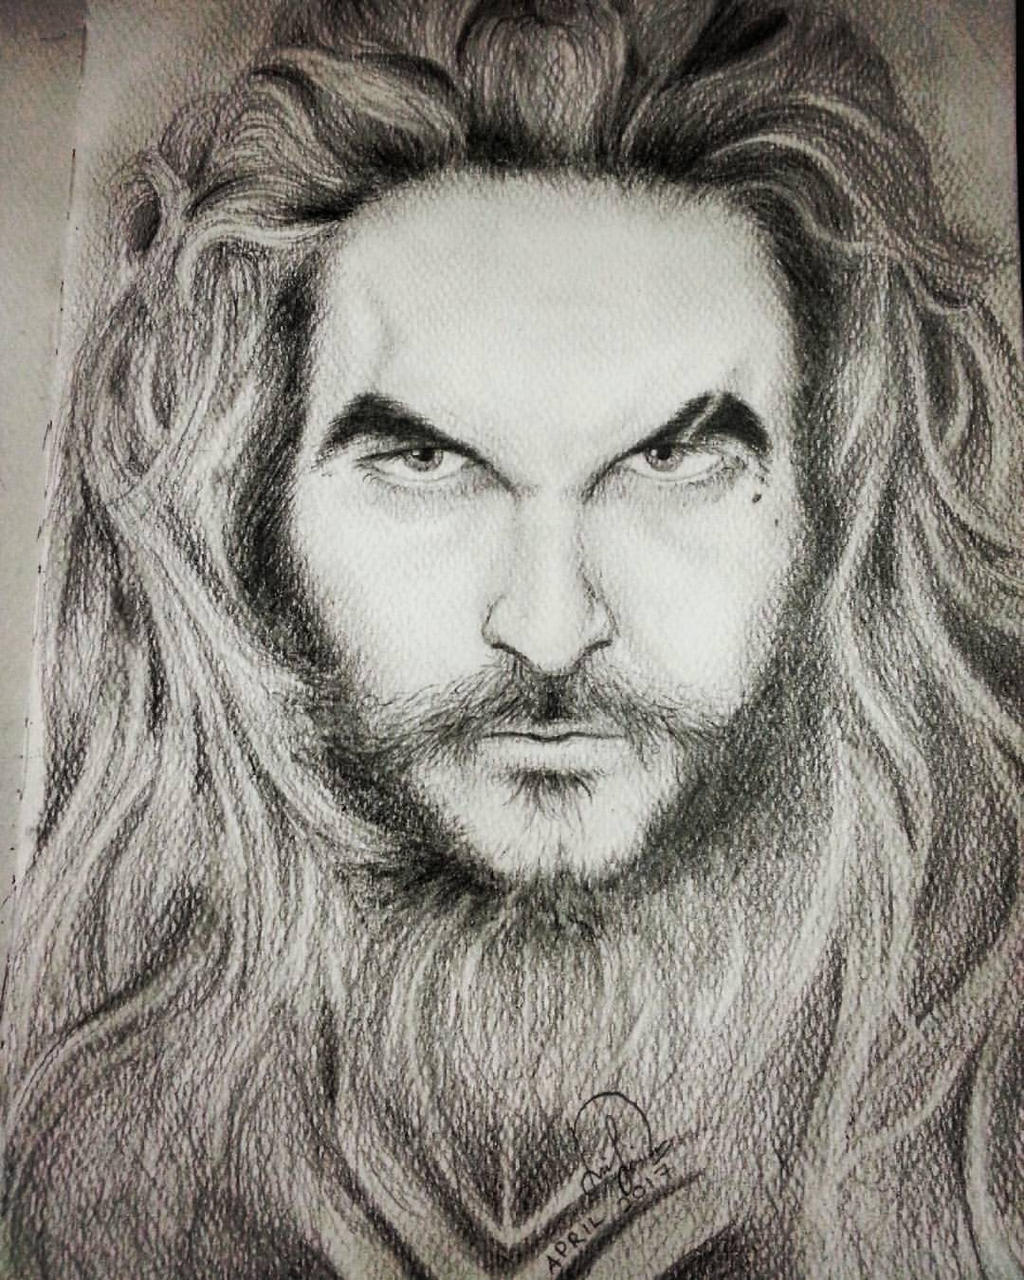 Aquaman from Justice League